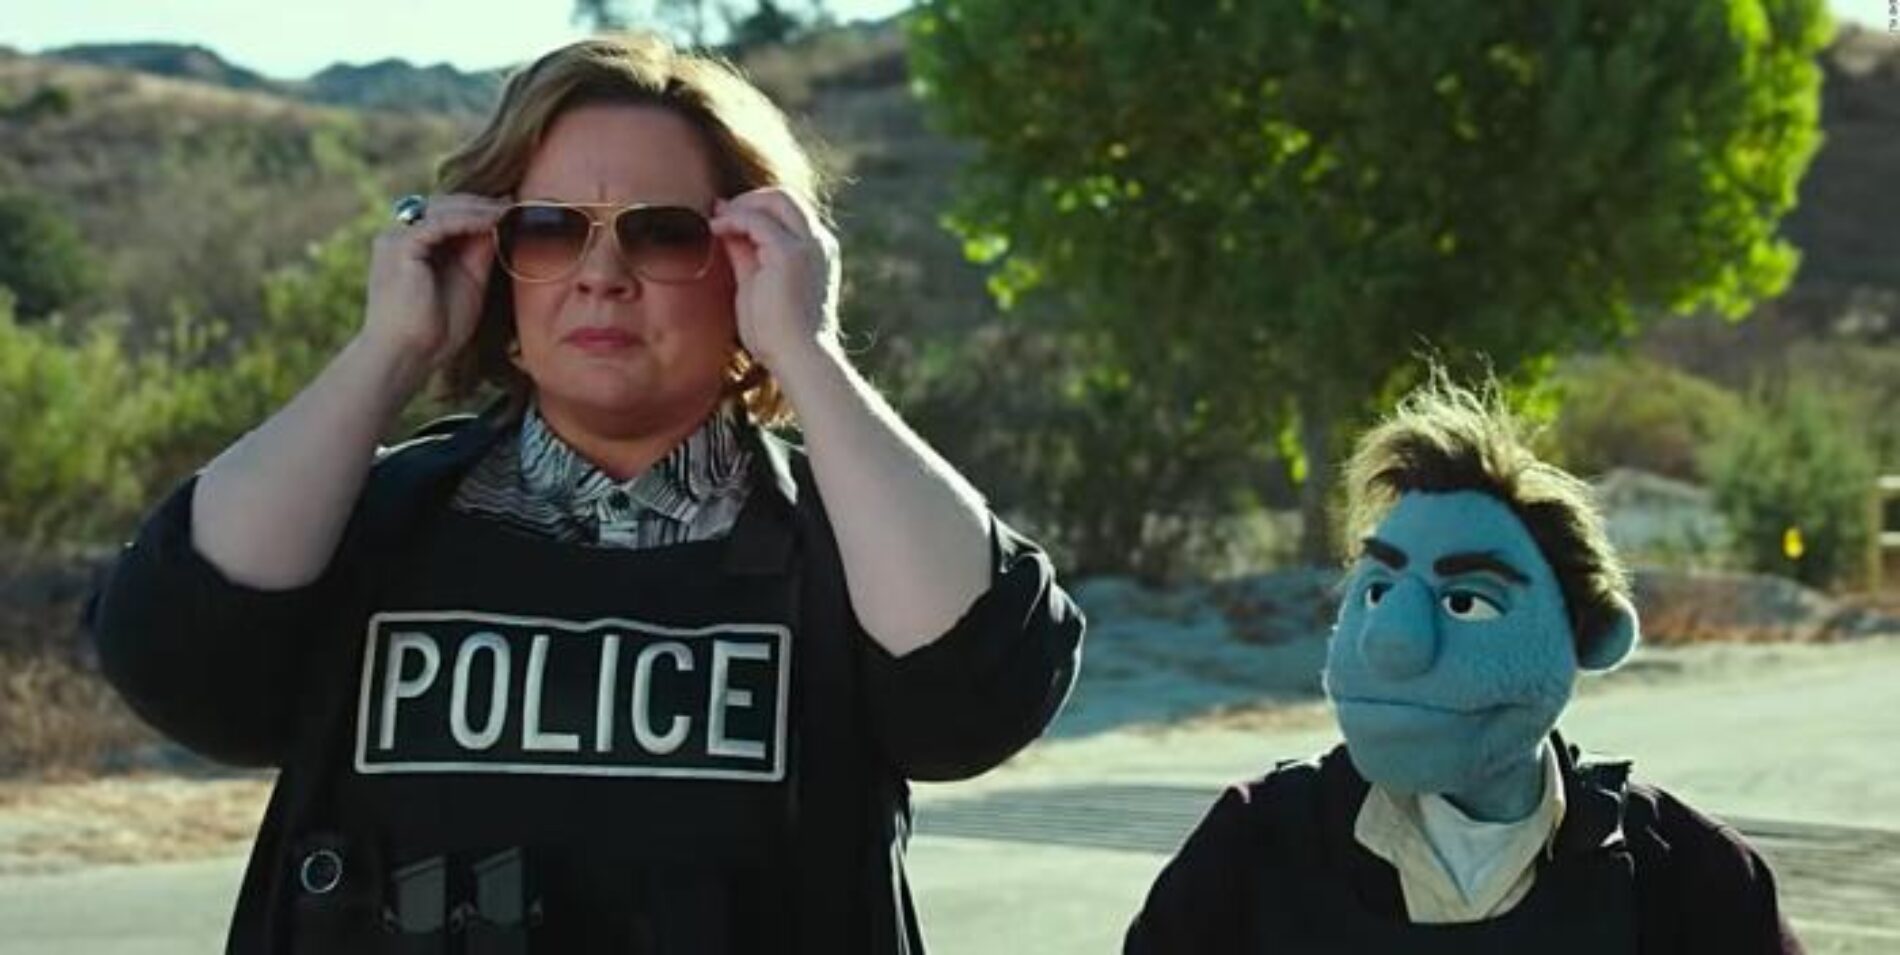 Box Office Final: “Happytime Murders” is Melissa McCarthy’s Lowest Grossing Opening Weekend of Her Career, Public Rejects Muppet Raunch